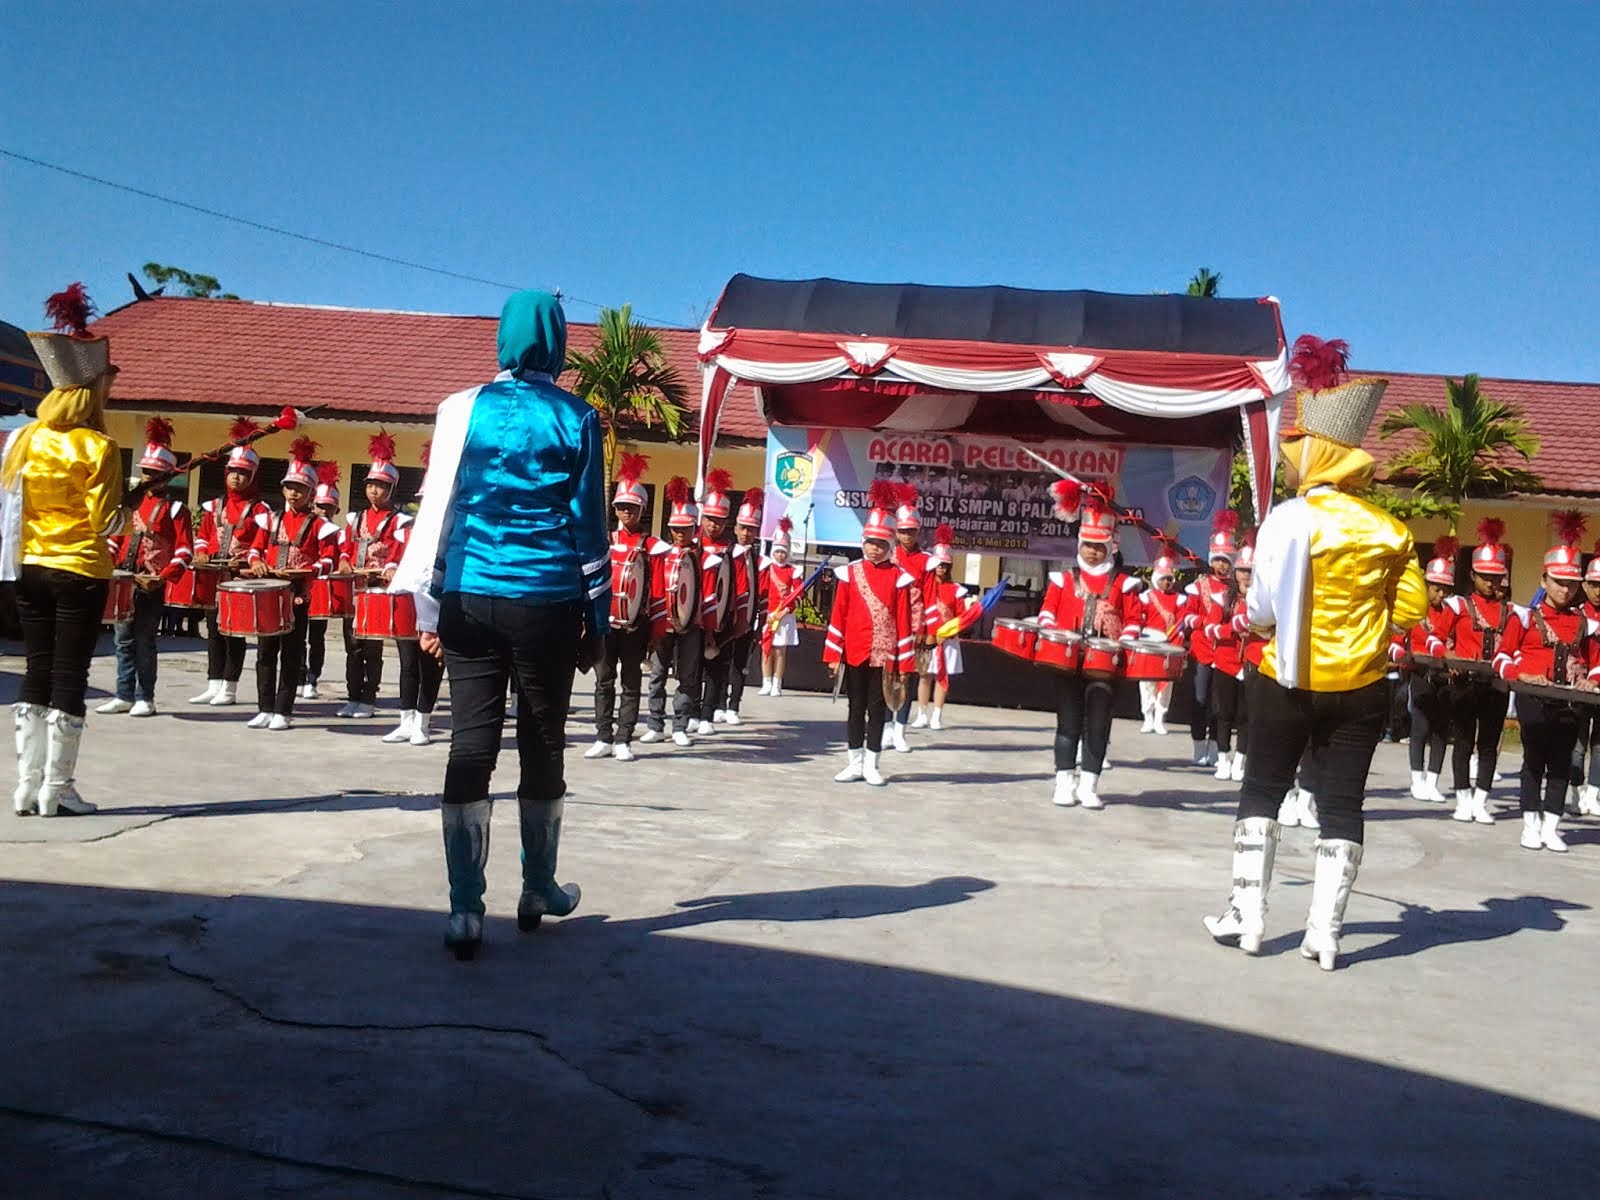 DRUM BAND SMPN 8